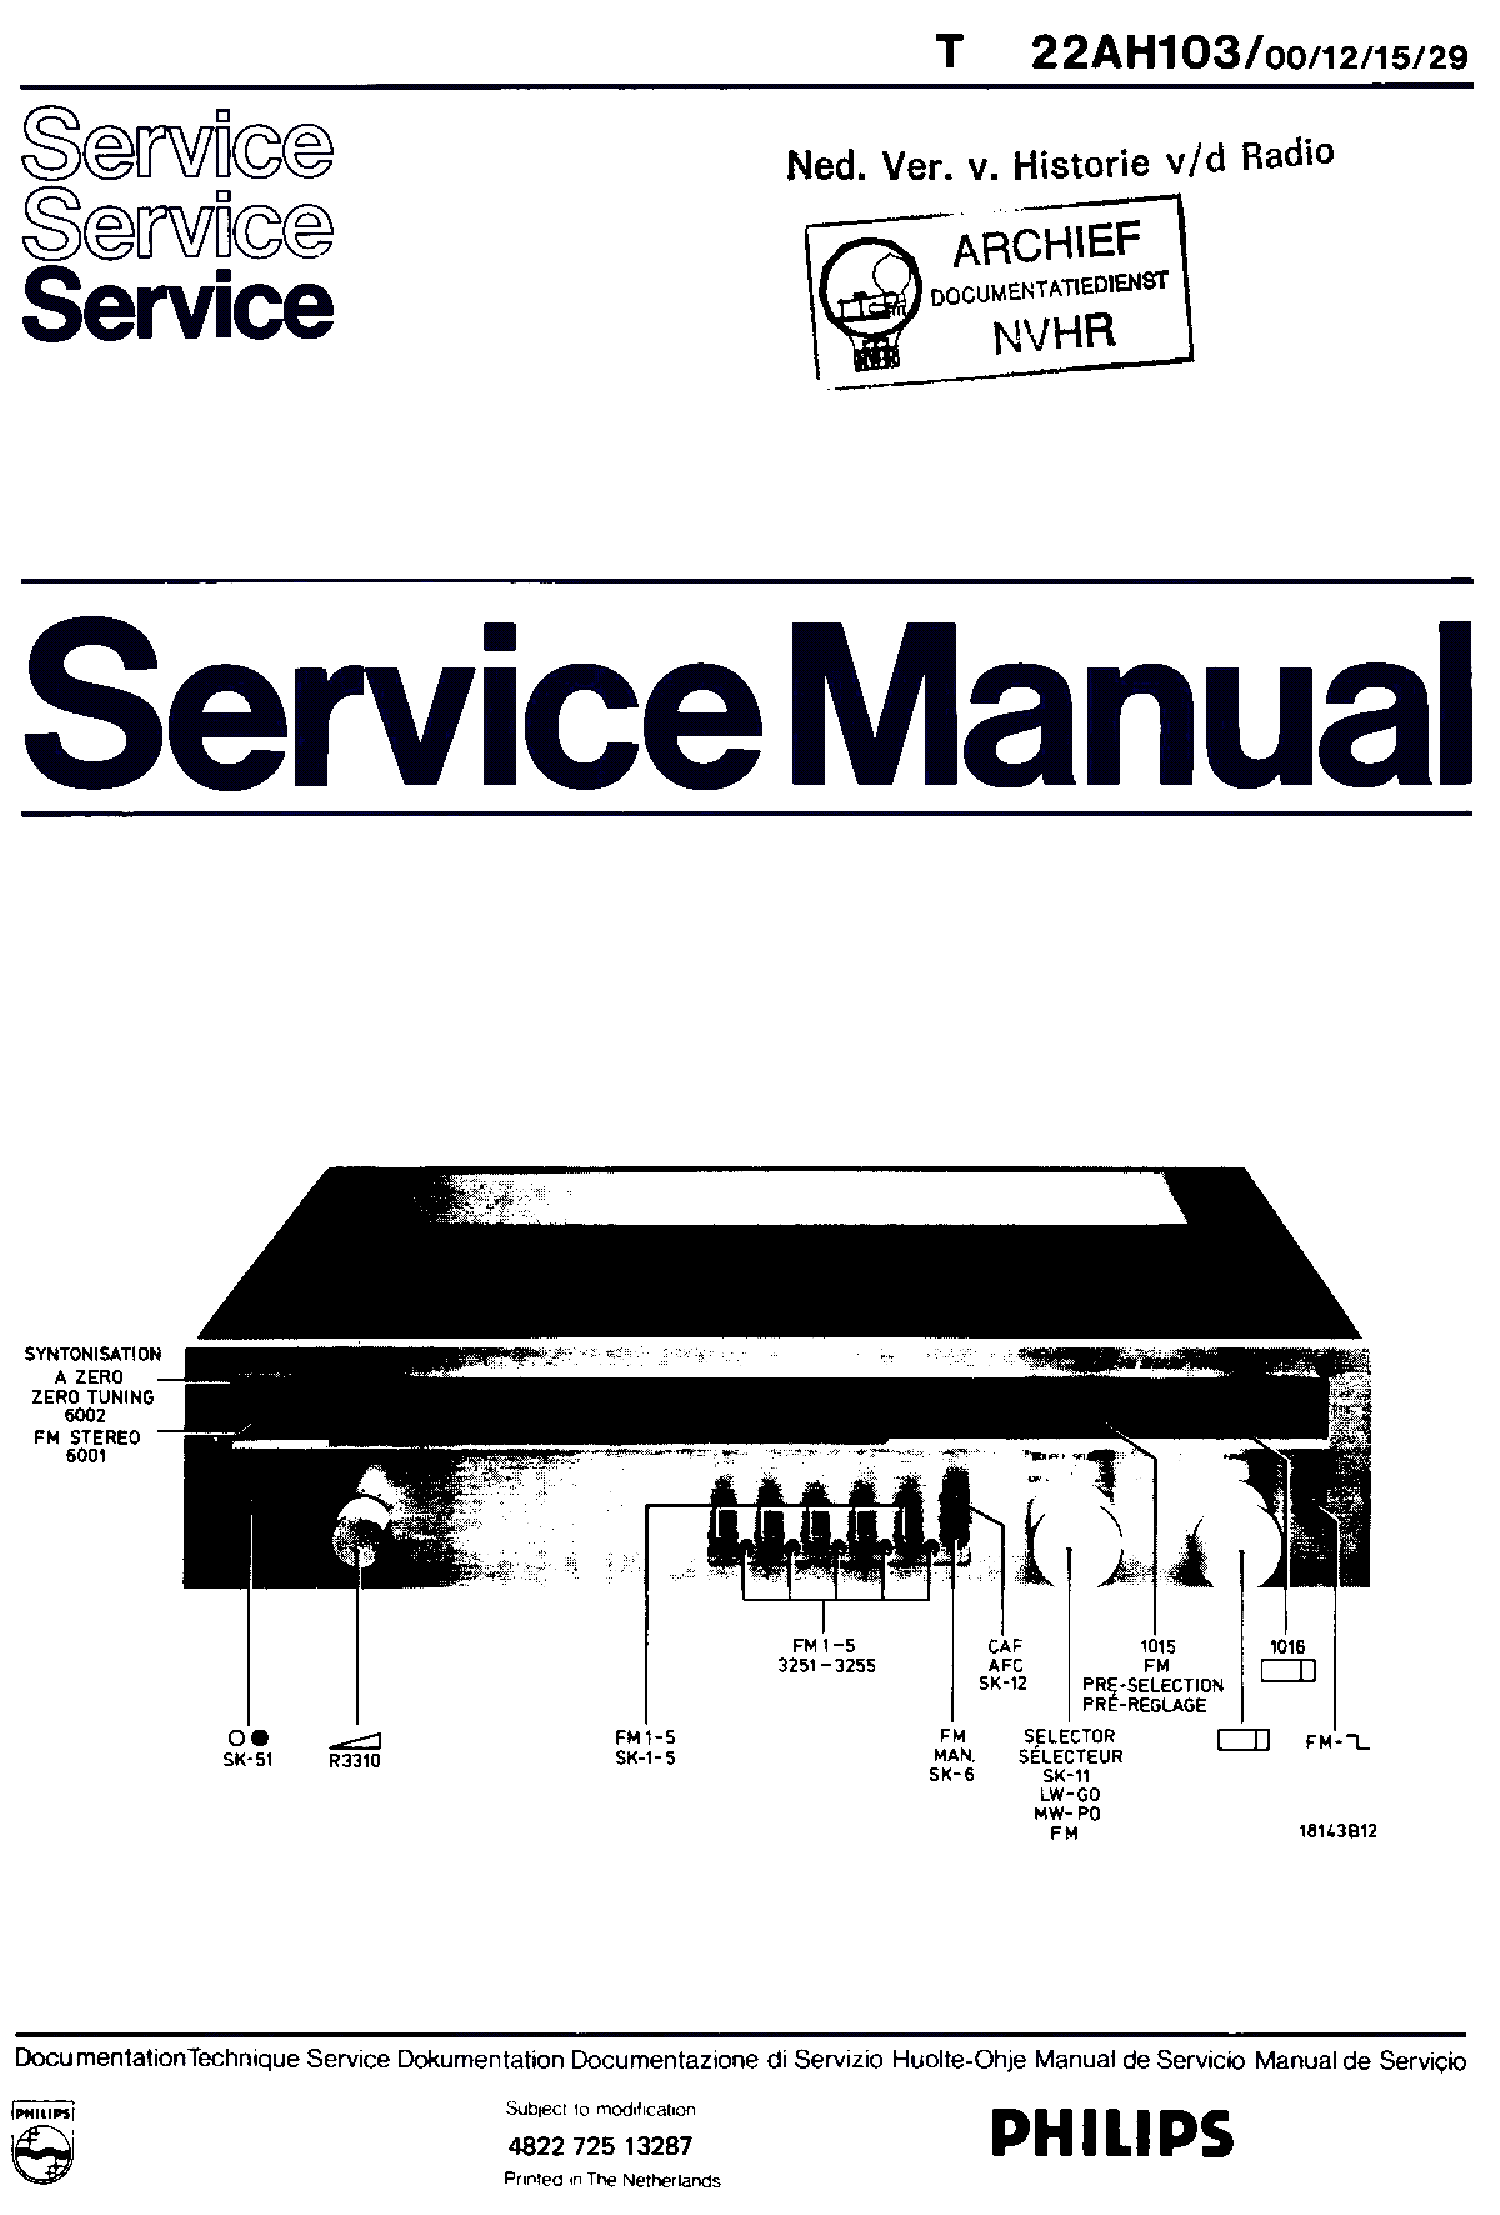 PHILIPS 22AH103-00-12-15-29 AM-FM STEREO TUNER 1981 SM service manual (1st page)